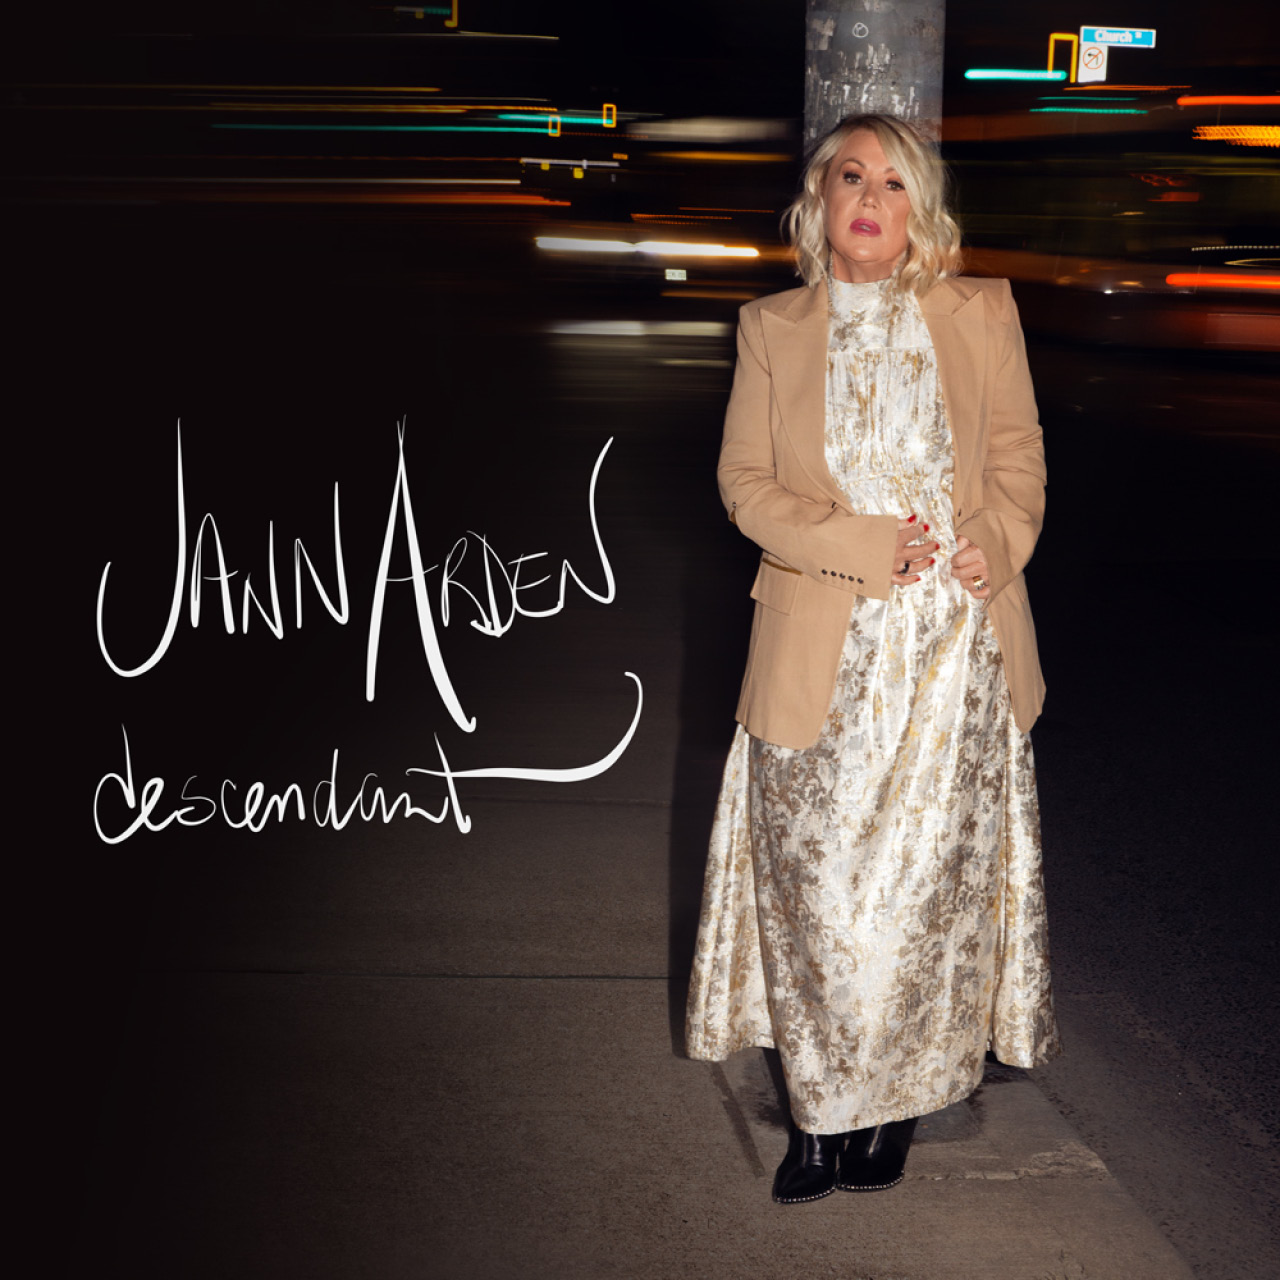 Standing on the sidewalk at nighttime, Jann Arden wears a long white dress with subtle detailing and a cream blazer.